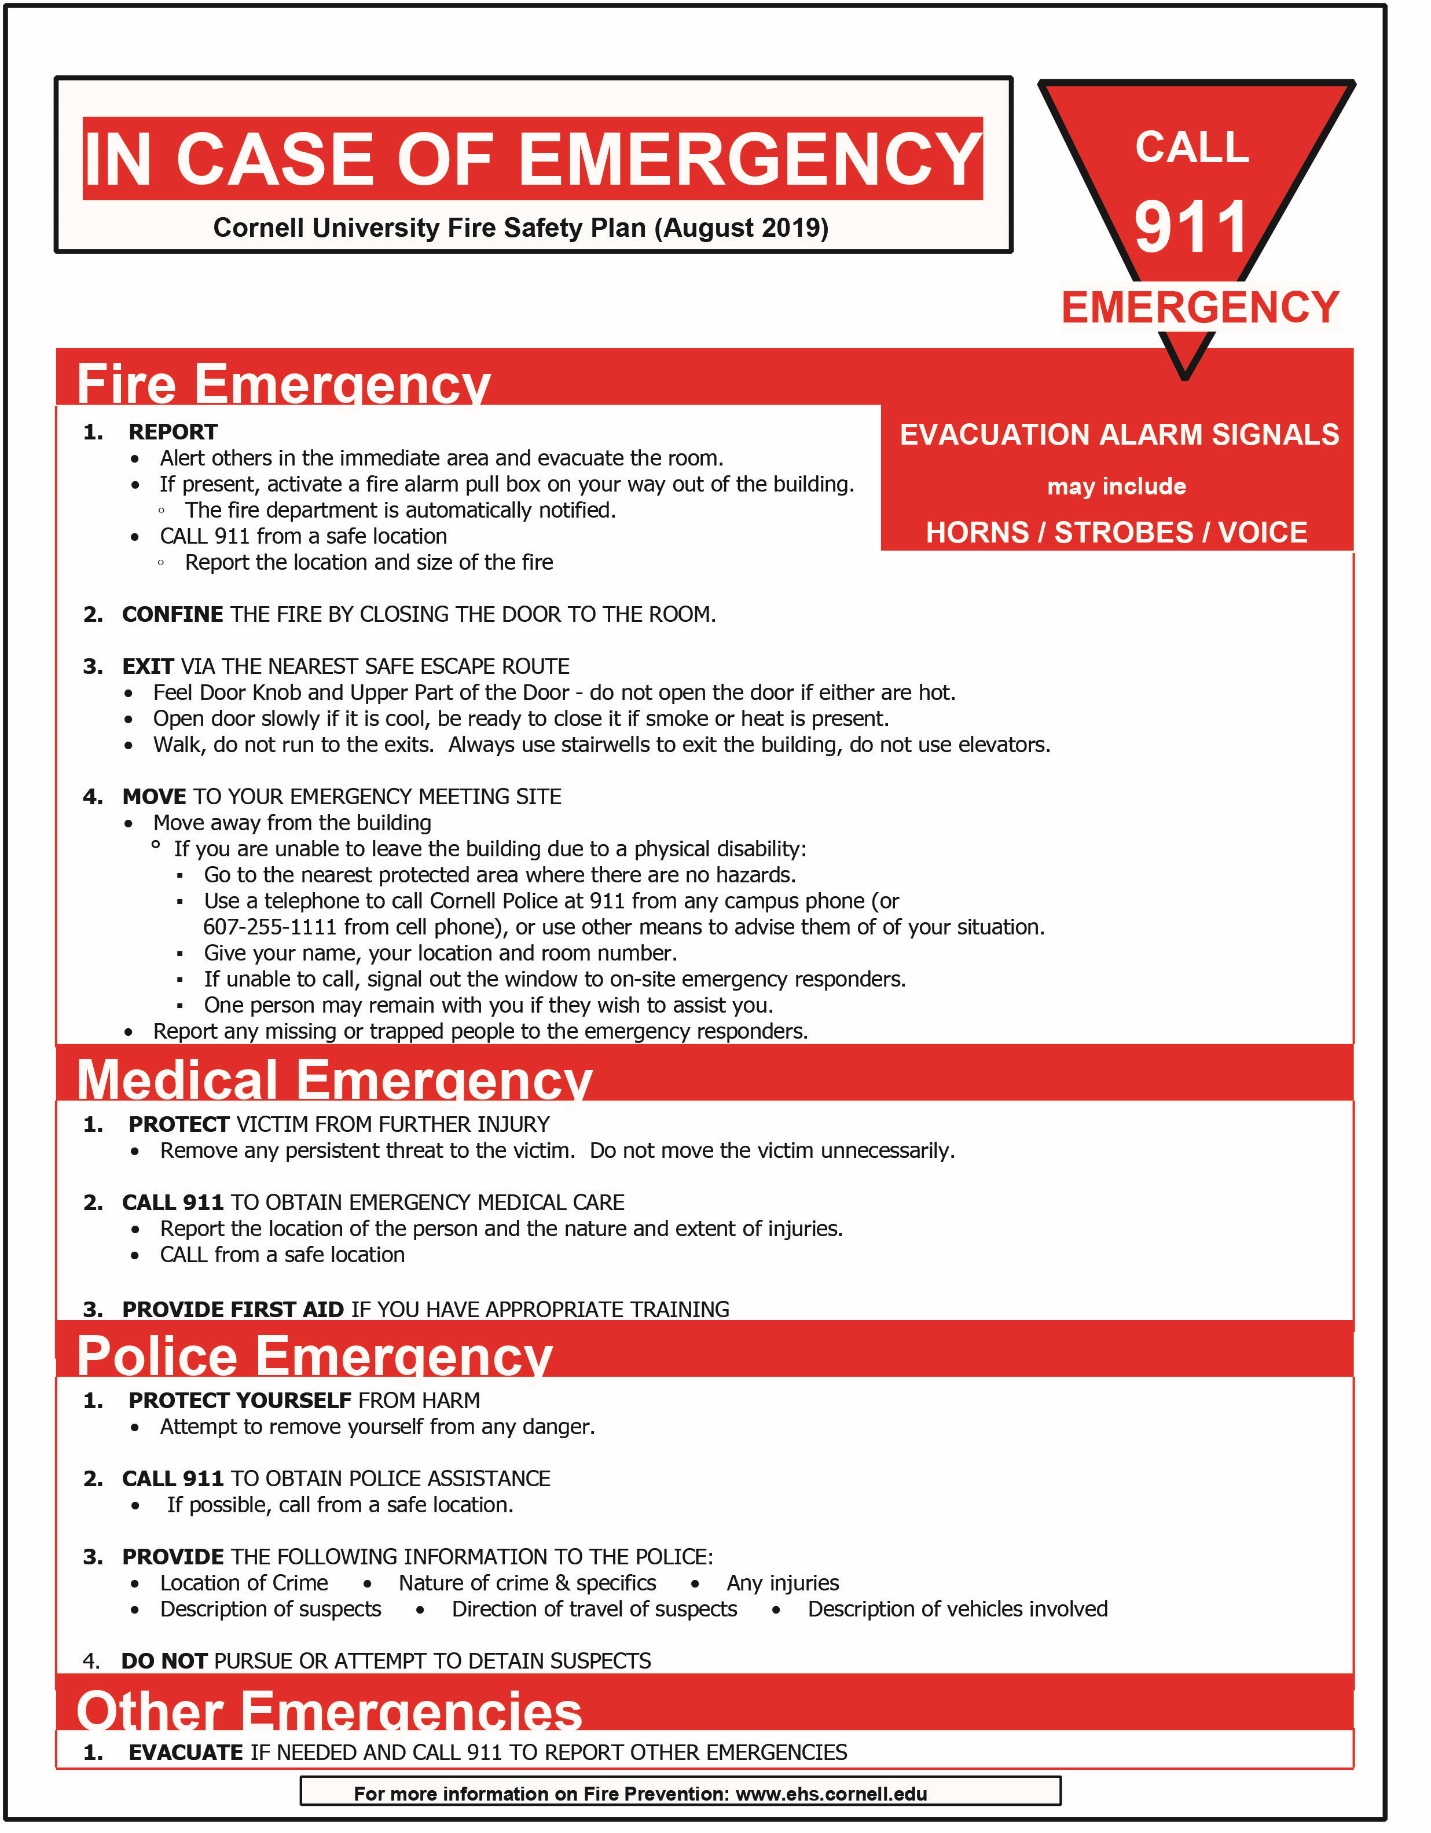 Fire Safety Plan (August 2019) Poster